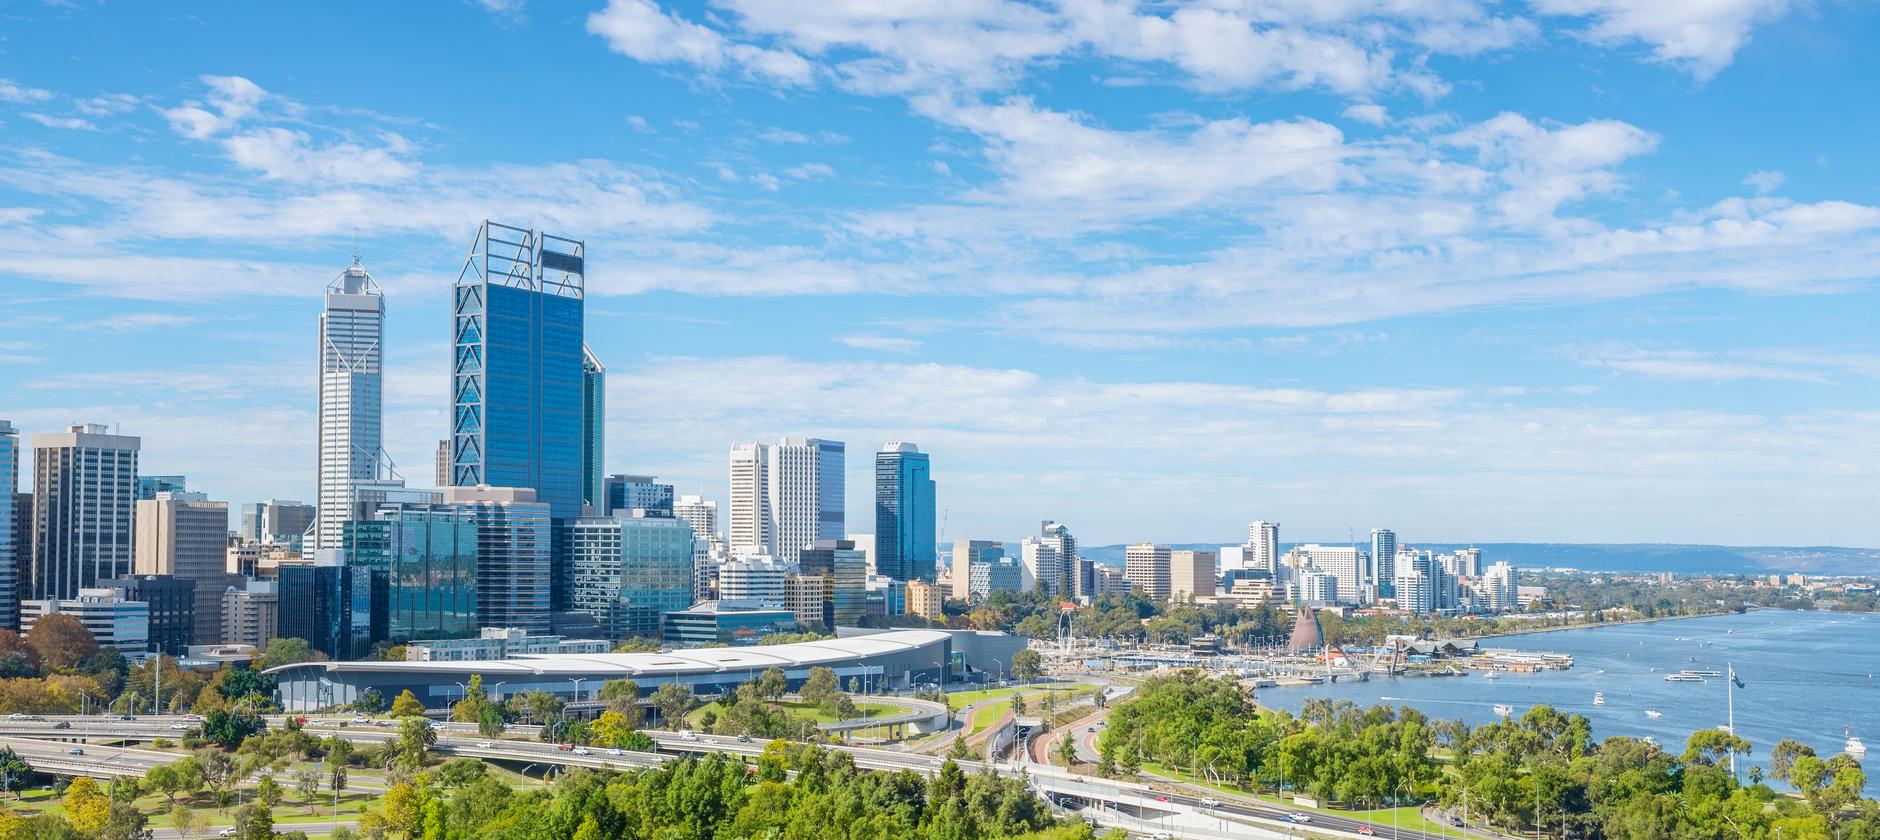 East or West? Australia's best place to invest